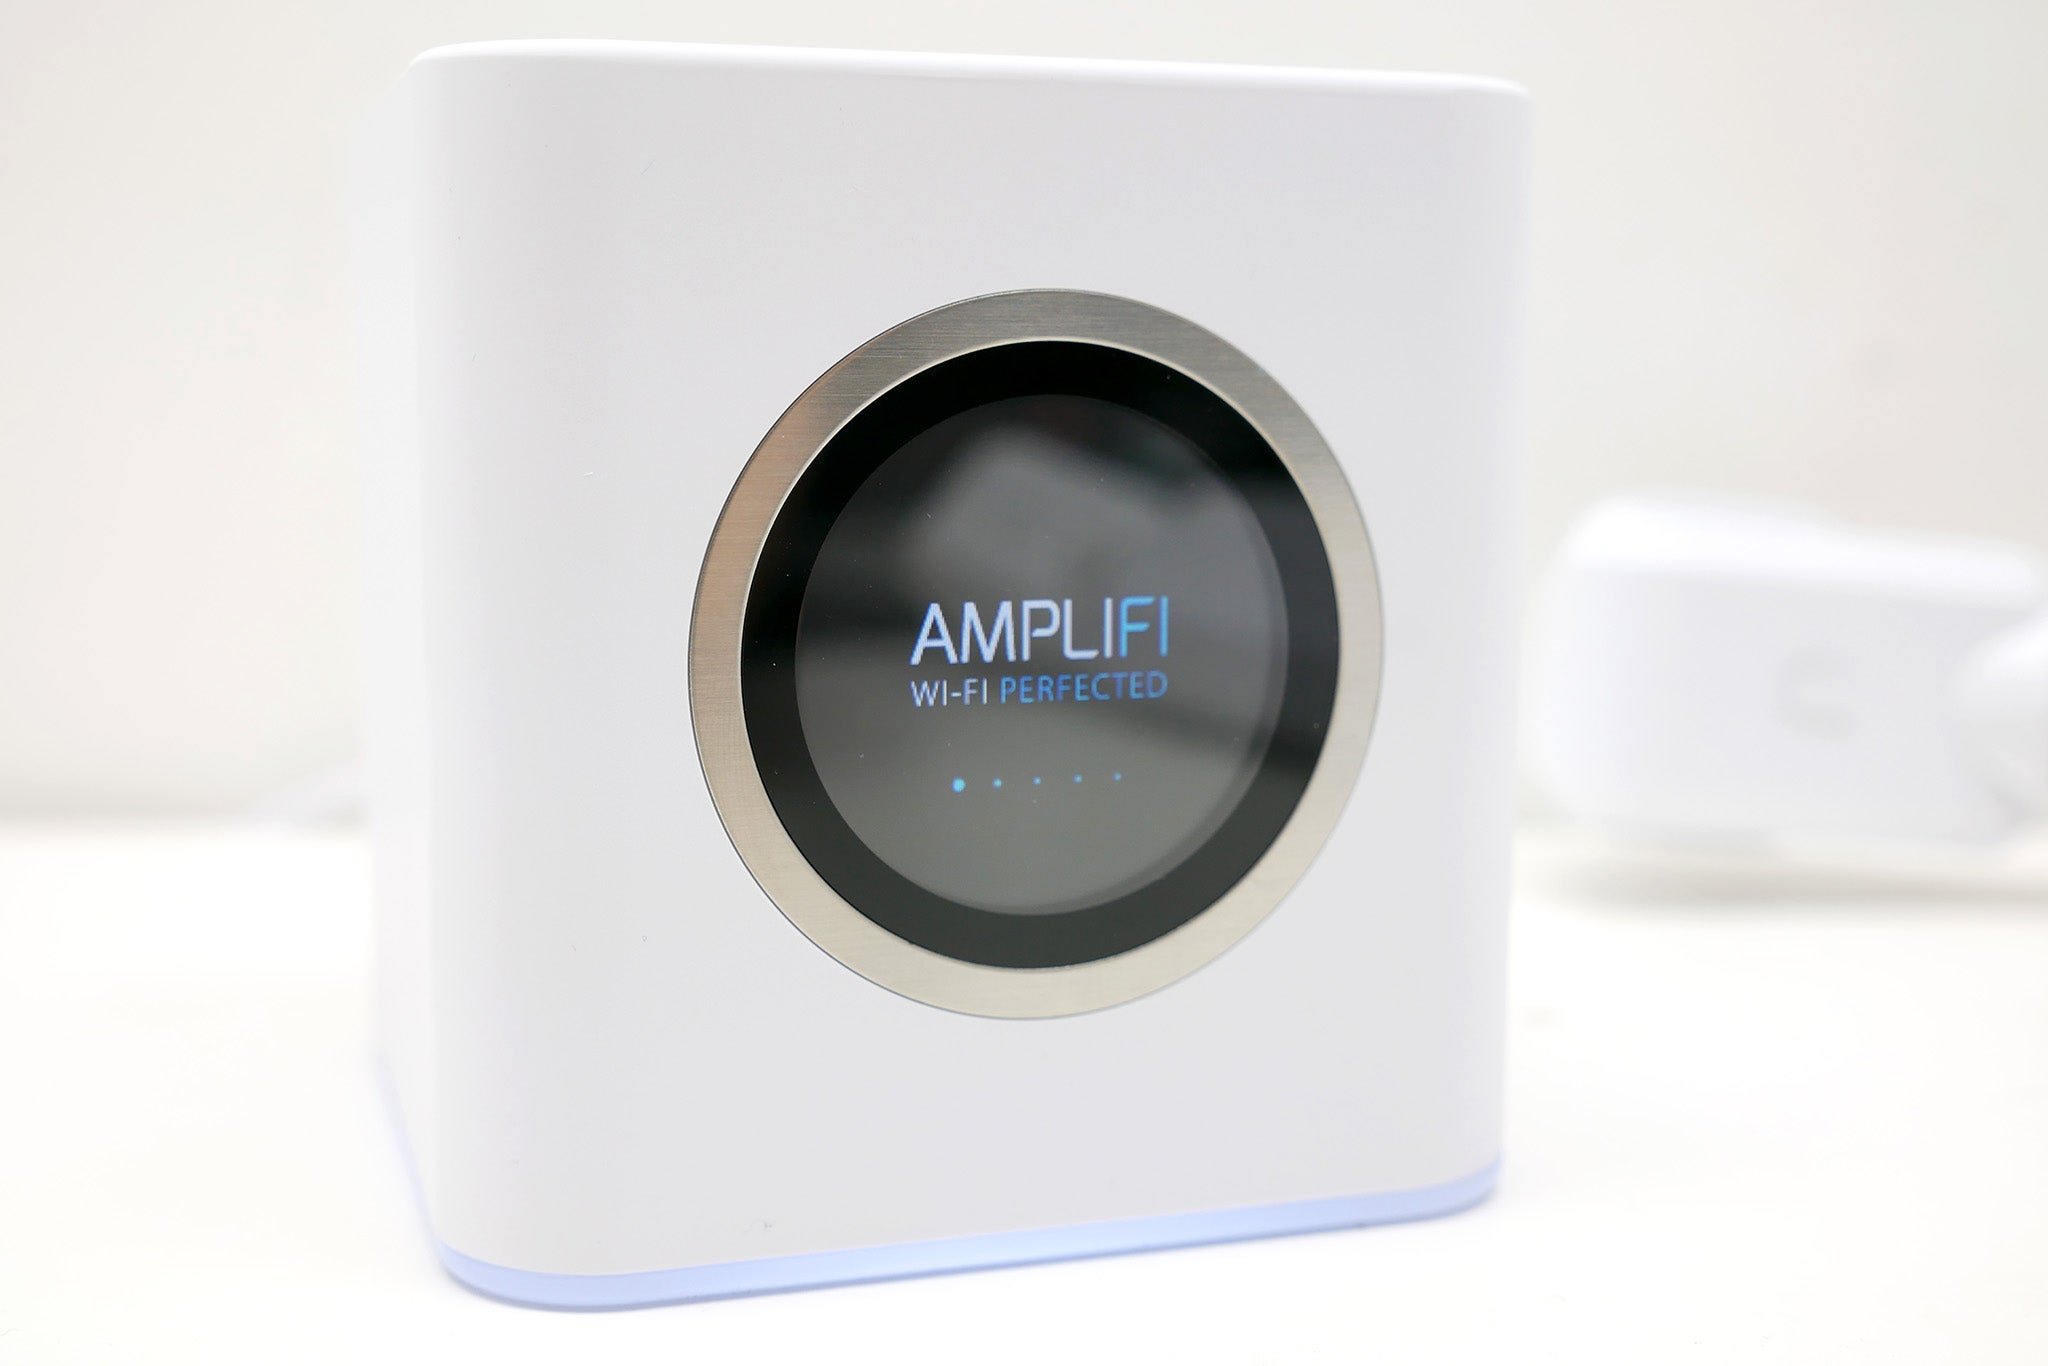 Ubiquiti AmpliFi router with LCD screen displaying logo.